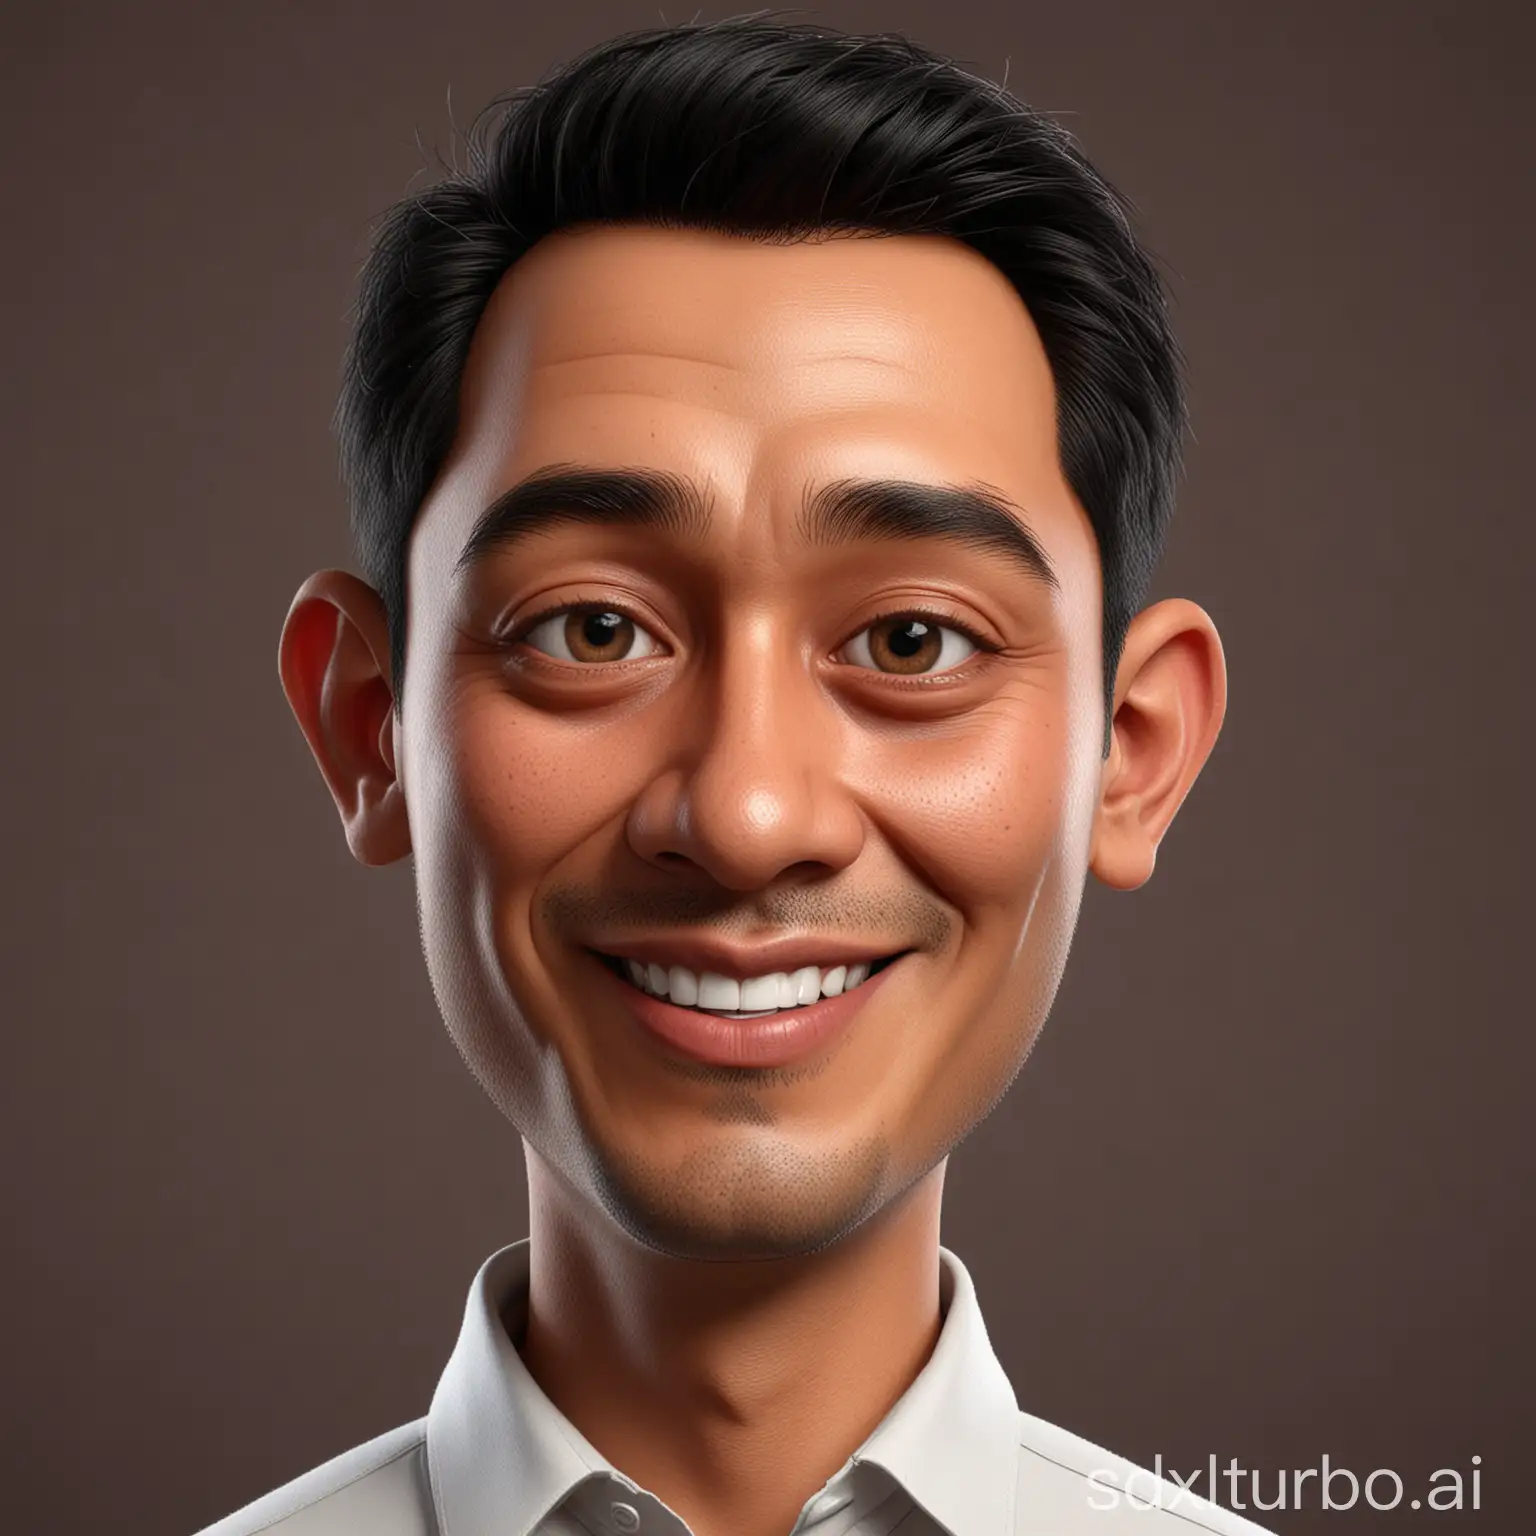 Create a caricature 3D realistic Cartoon art style with a big head. A 40 year old Indonesian man. Tall, slightly thin body, oval face shape. Oval chin, handsome, slightly round eyes, clean white skin, faint smile. Black hair with a side part. Wearing a white shirt. Body position is clearly visible. Red background. Use soft photography lighting, hair lighting, top lighting, side lighting. Highest quality photos.